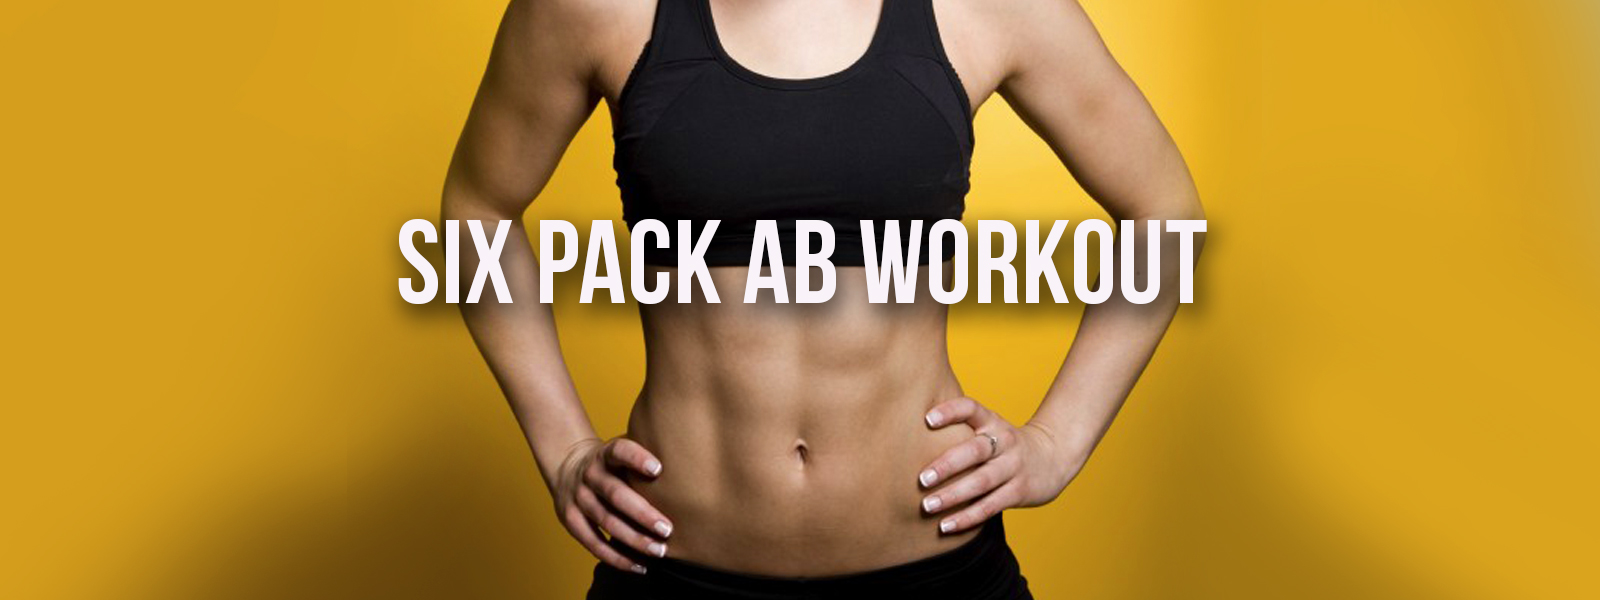 Six Pack Ab Workout How To Design A Six Pack Ab Workout Missfit 